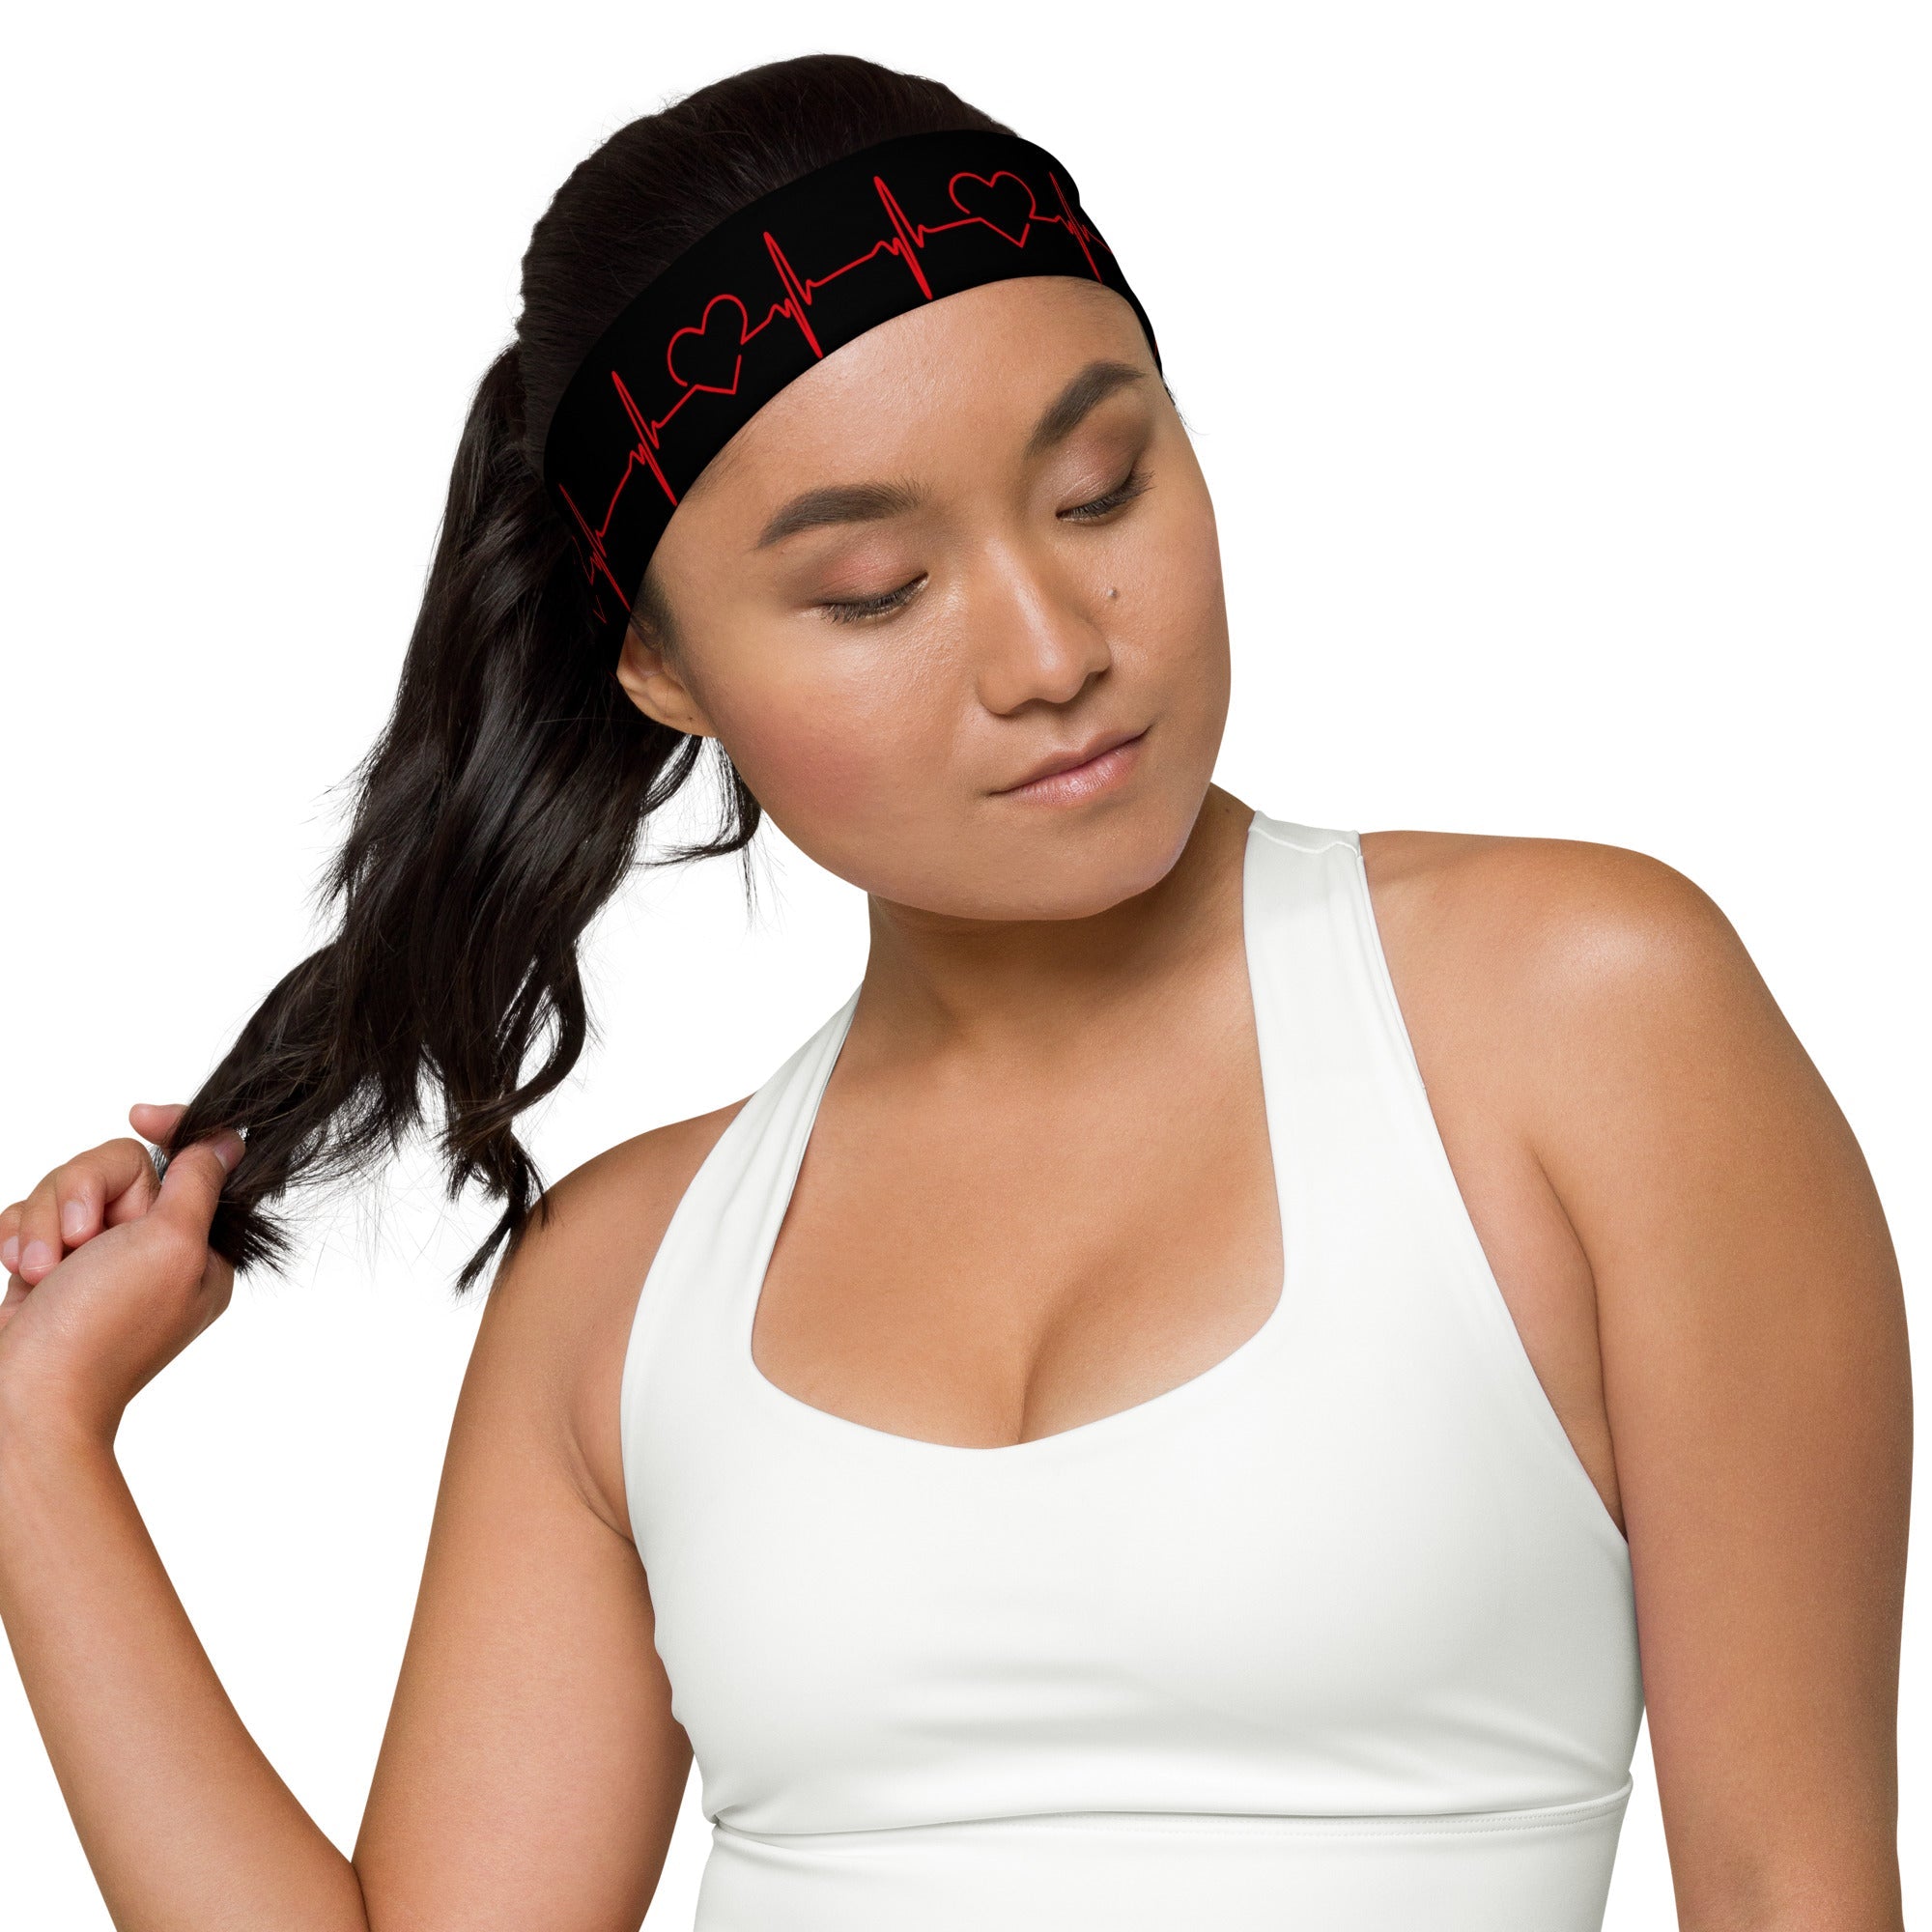 Stretchy Headbands - ECG pattern - Black and Red